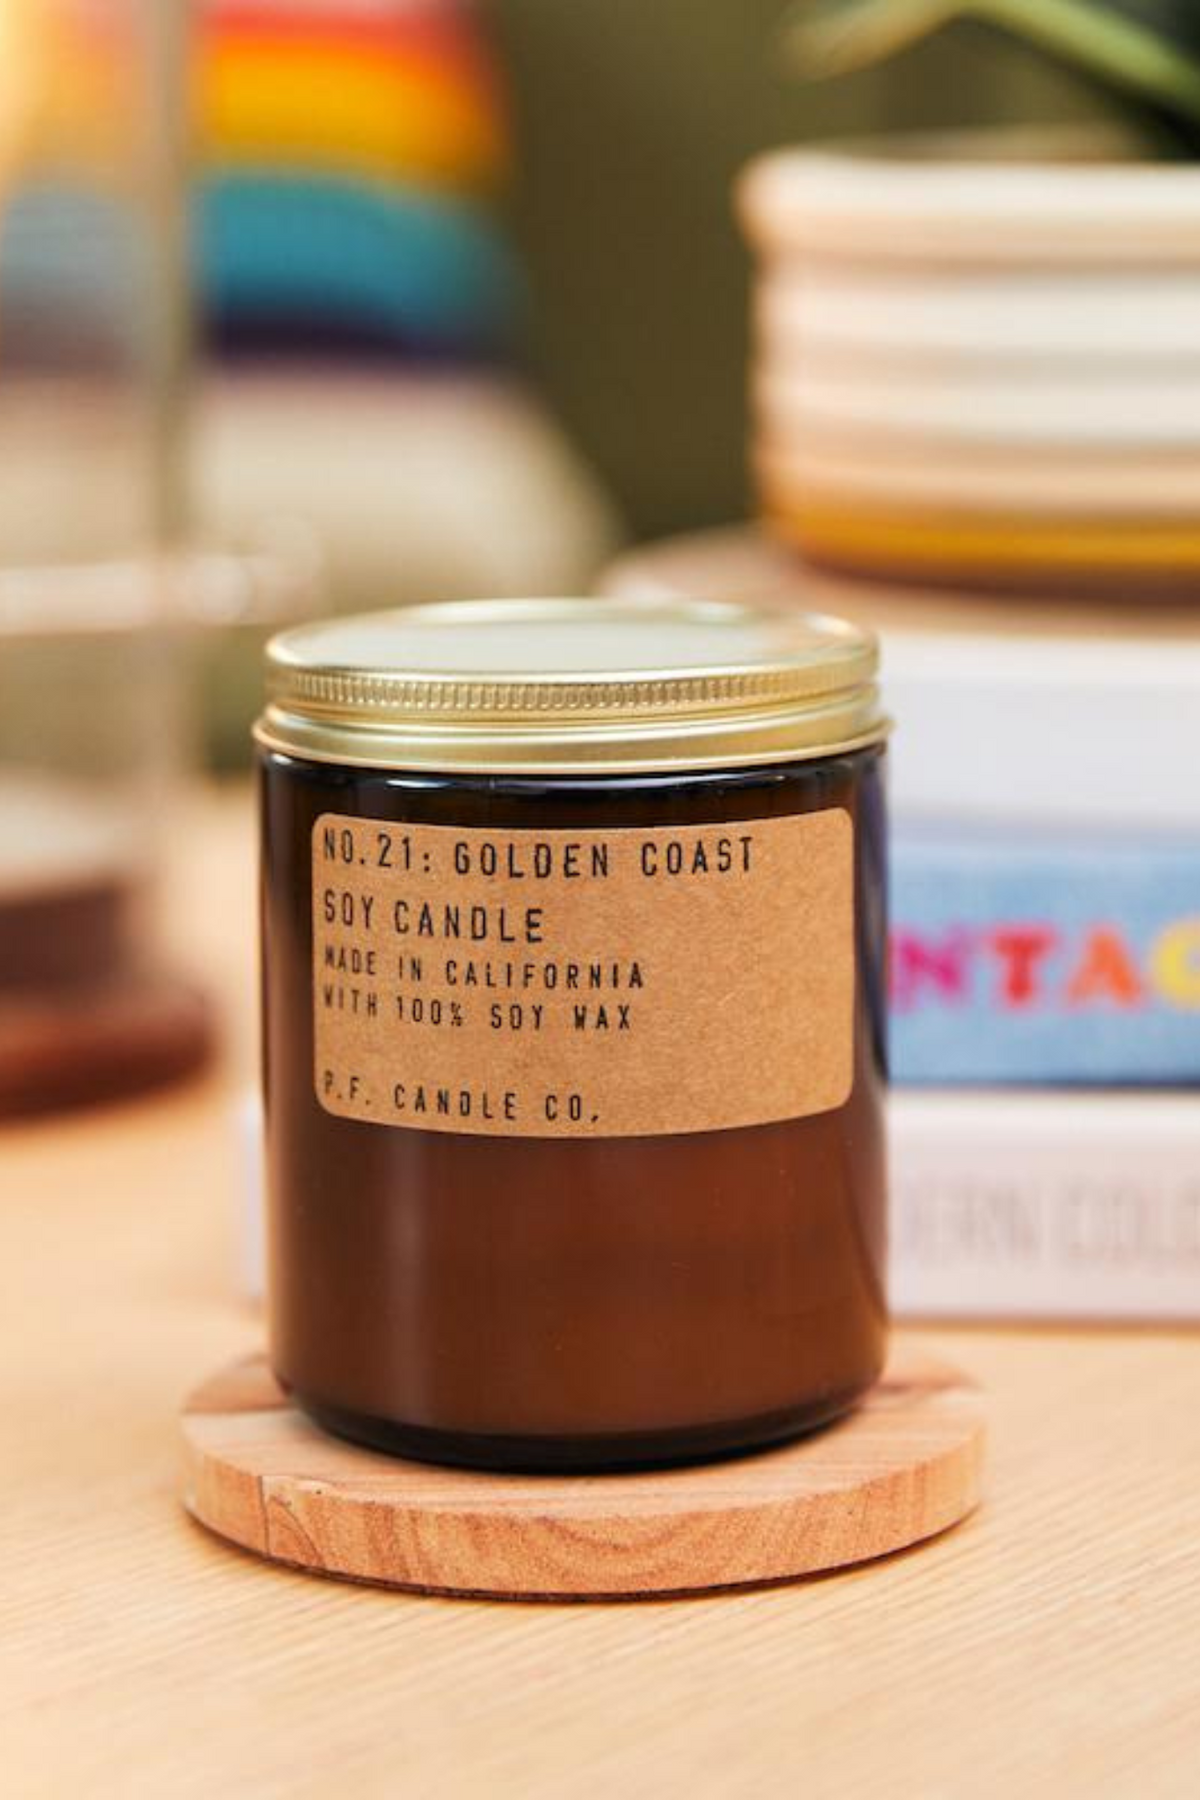 P.F. Candle Co. Golden Coast Candle